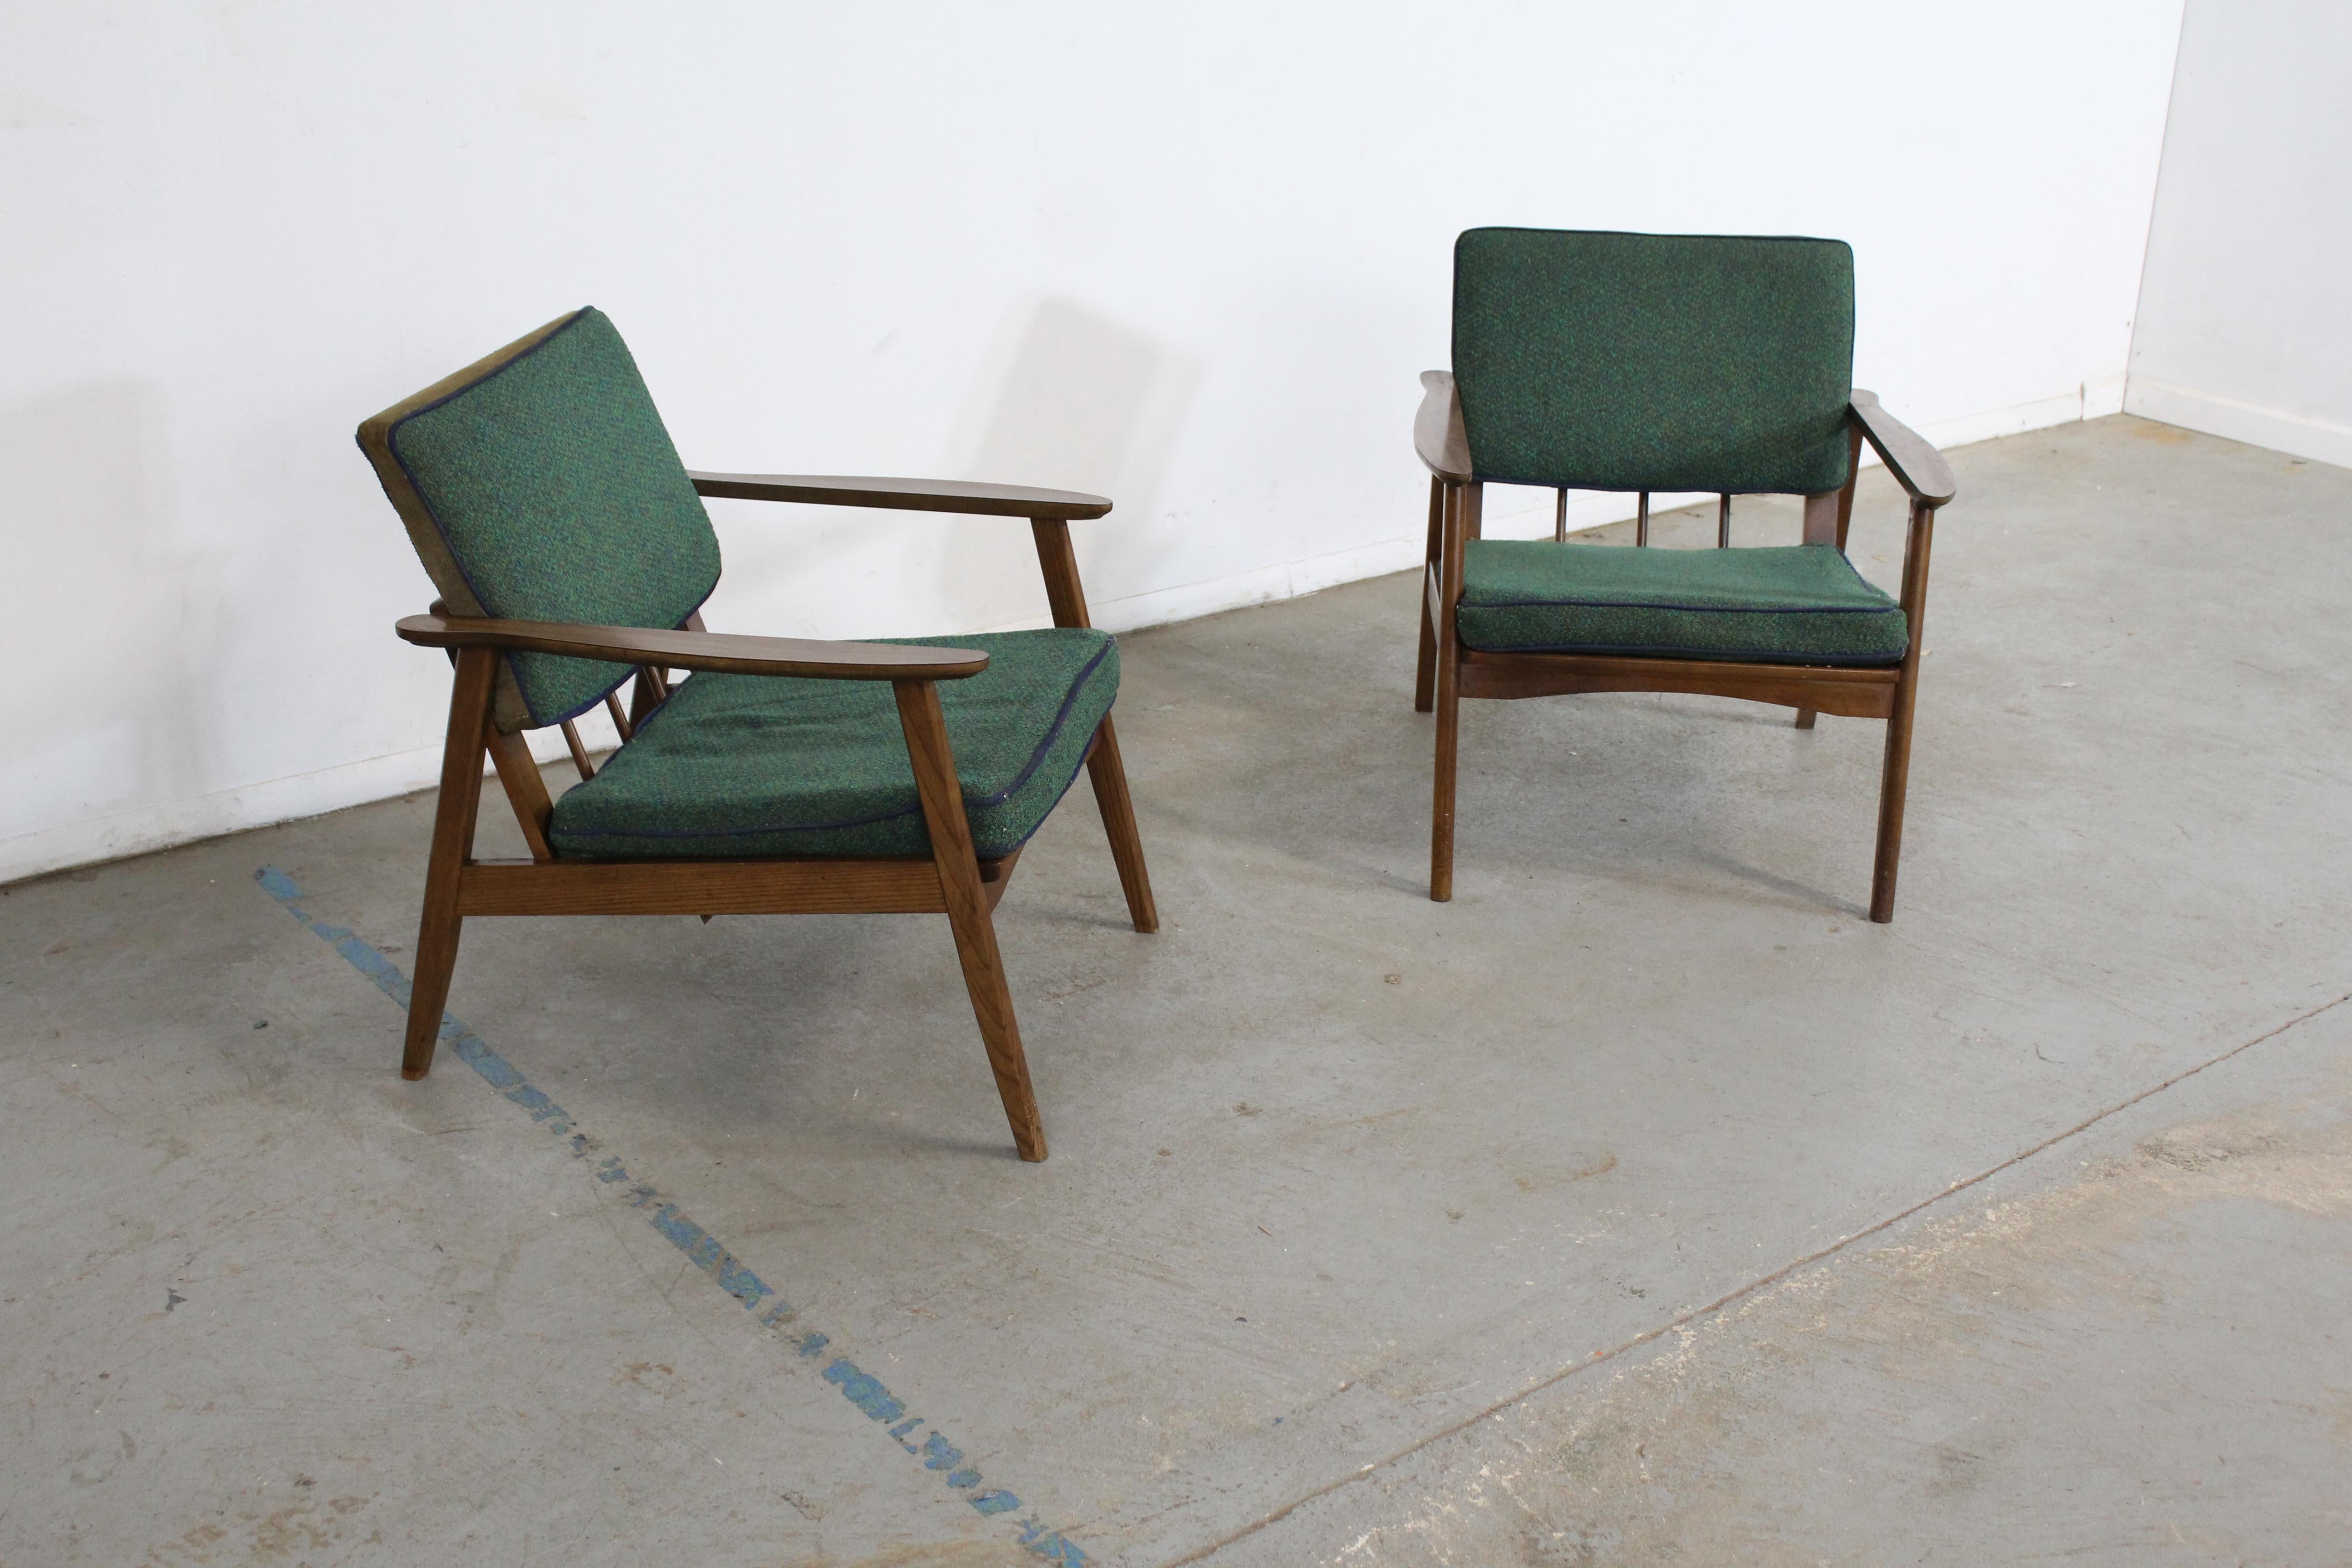 Pair of mid-century lounge chairs walnut open arm lounge chairs

This set includes 2 open arm walnut lounge chairs. The arms feature a laminate top. They need to be reupholstered. The chairs are in good condition, showing minor age wear (cushions